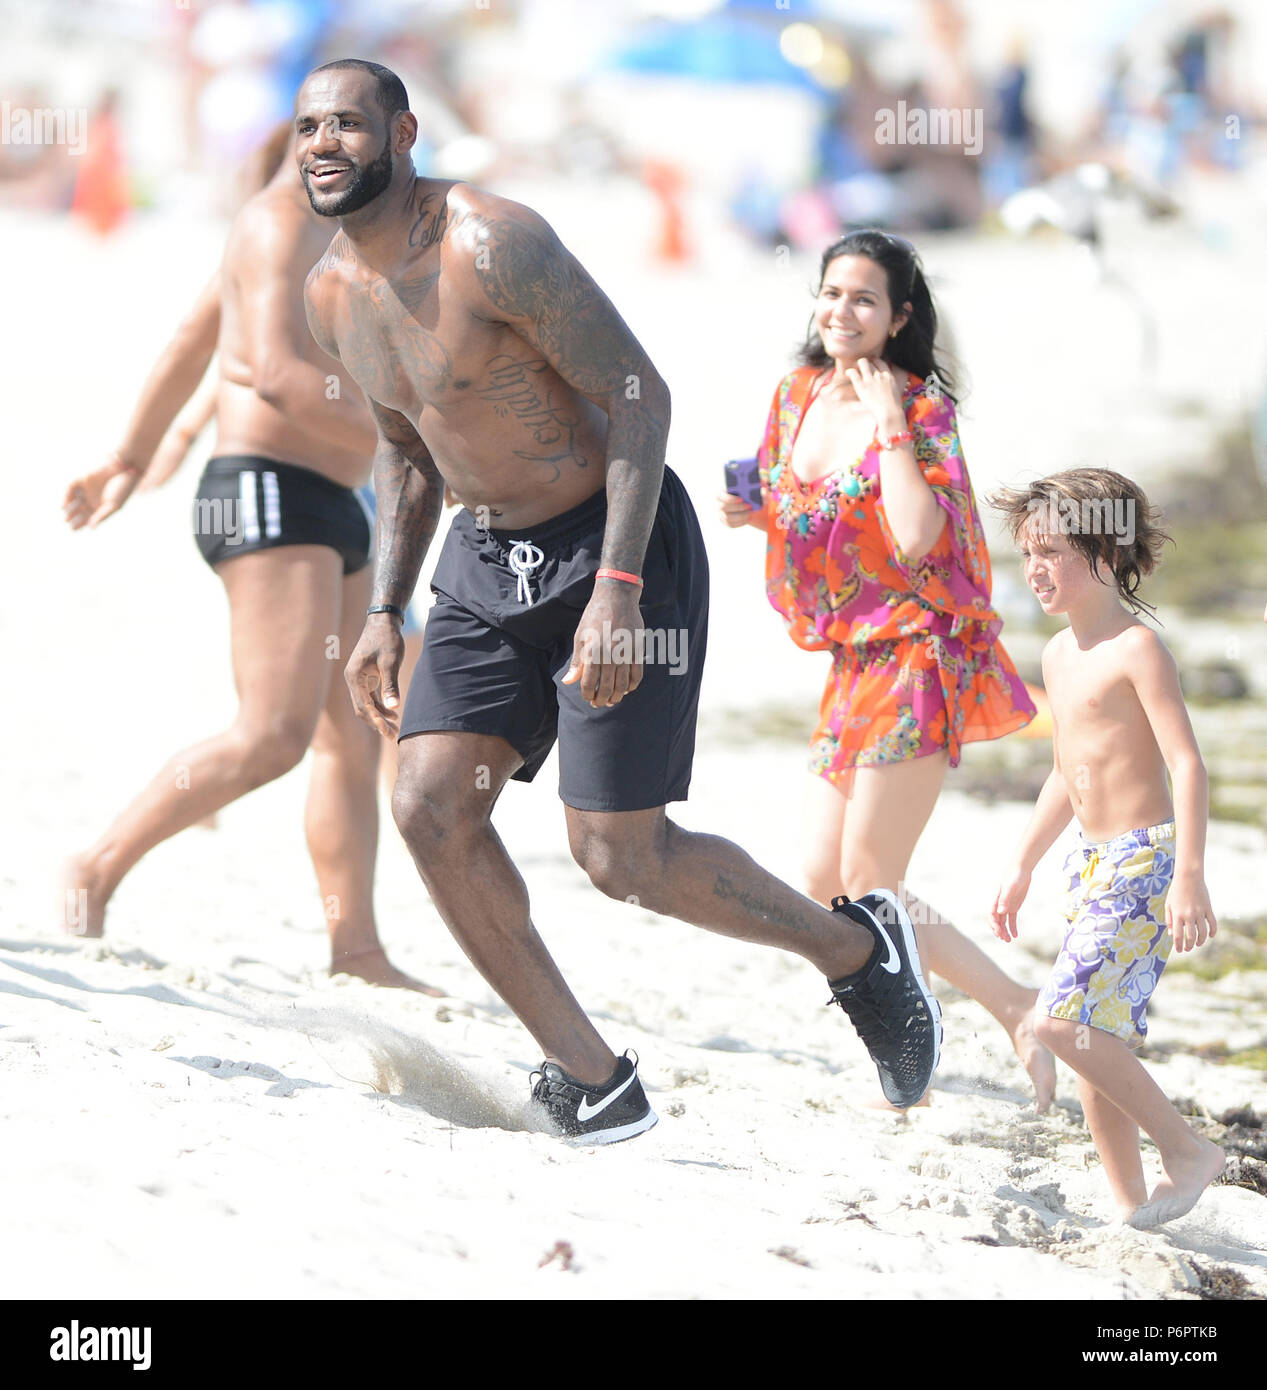 MIAMI BEACH, FL - AUGUST 16: LeBron James showed up on location in Miami  Beach for a Nike commercial. The NBA champion hopped on a bicycle and rode  around the iconic Ocean